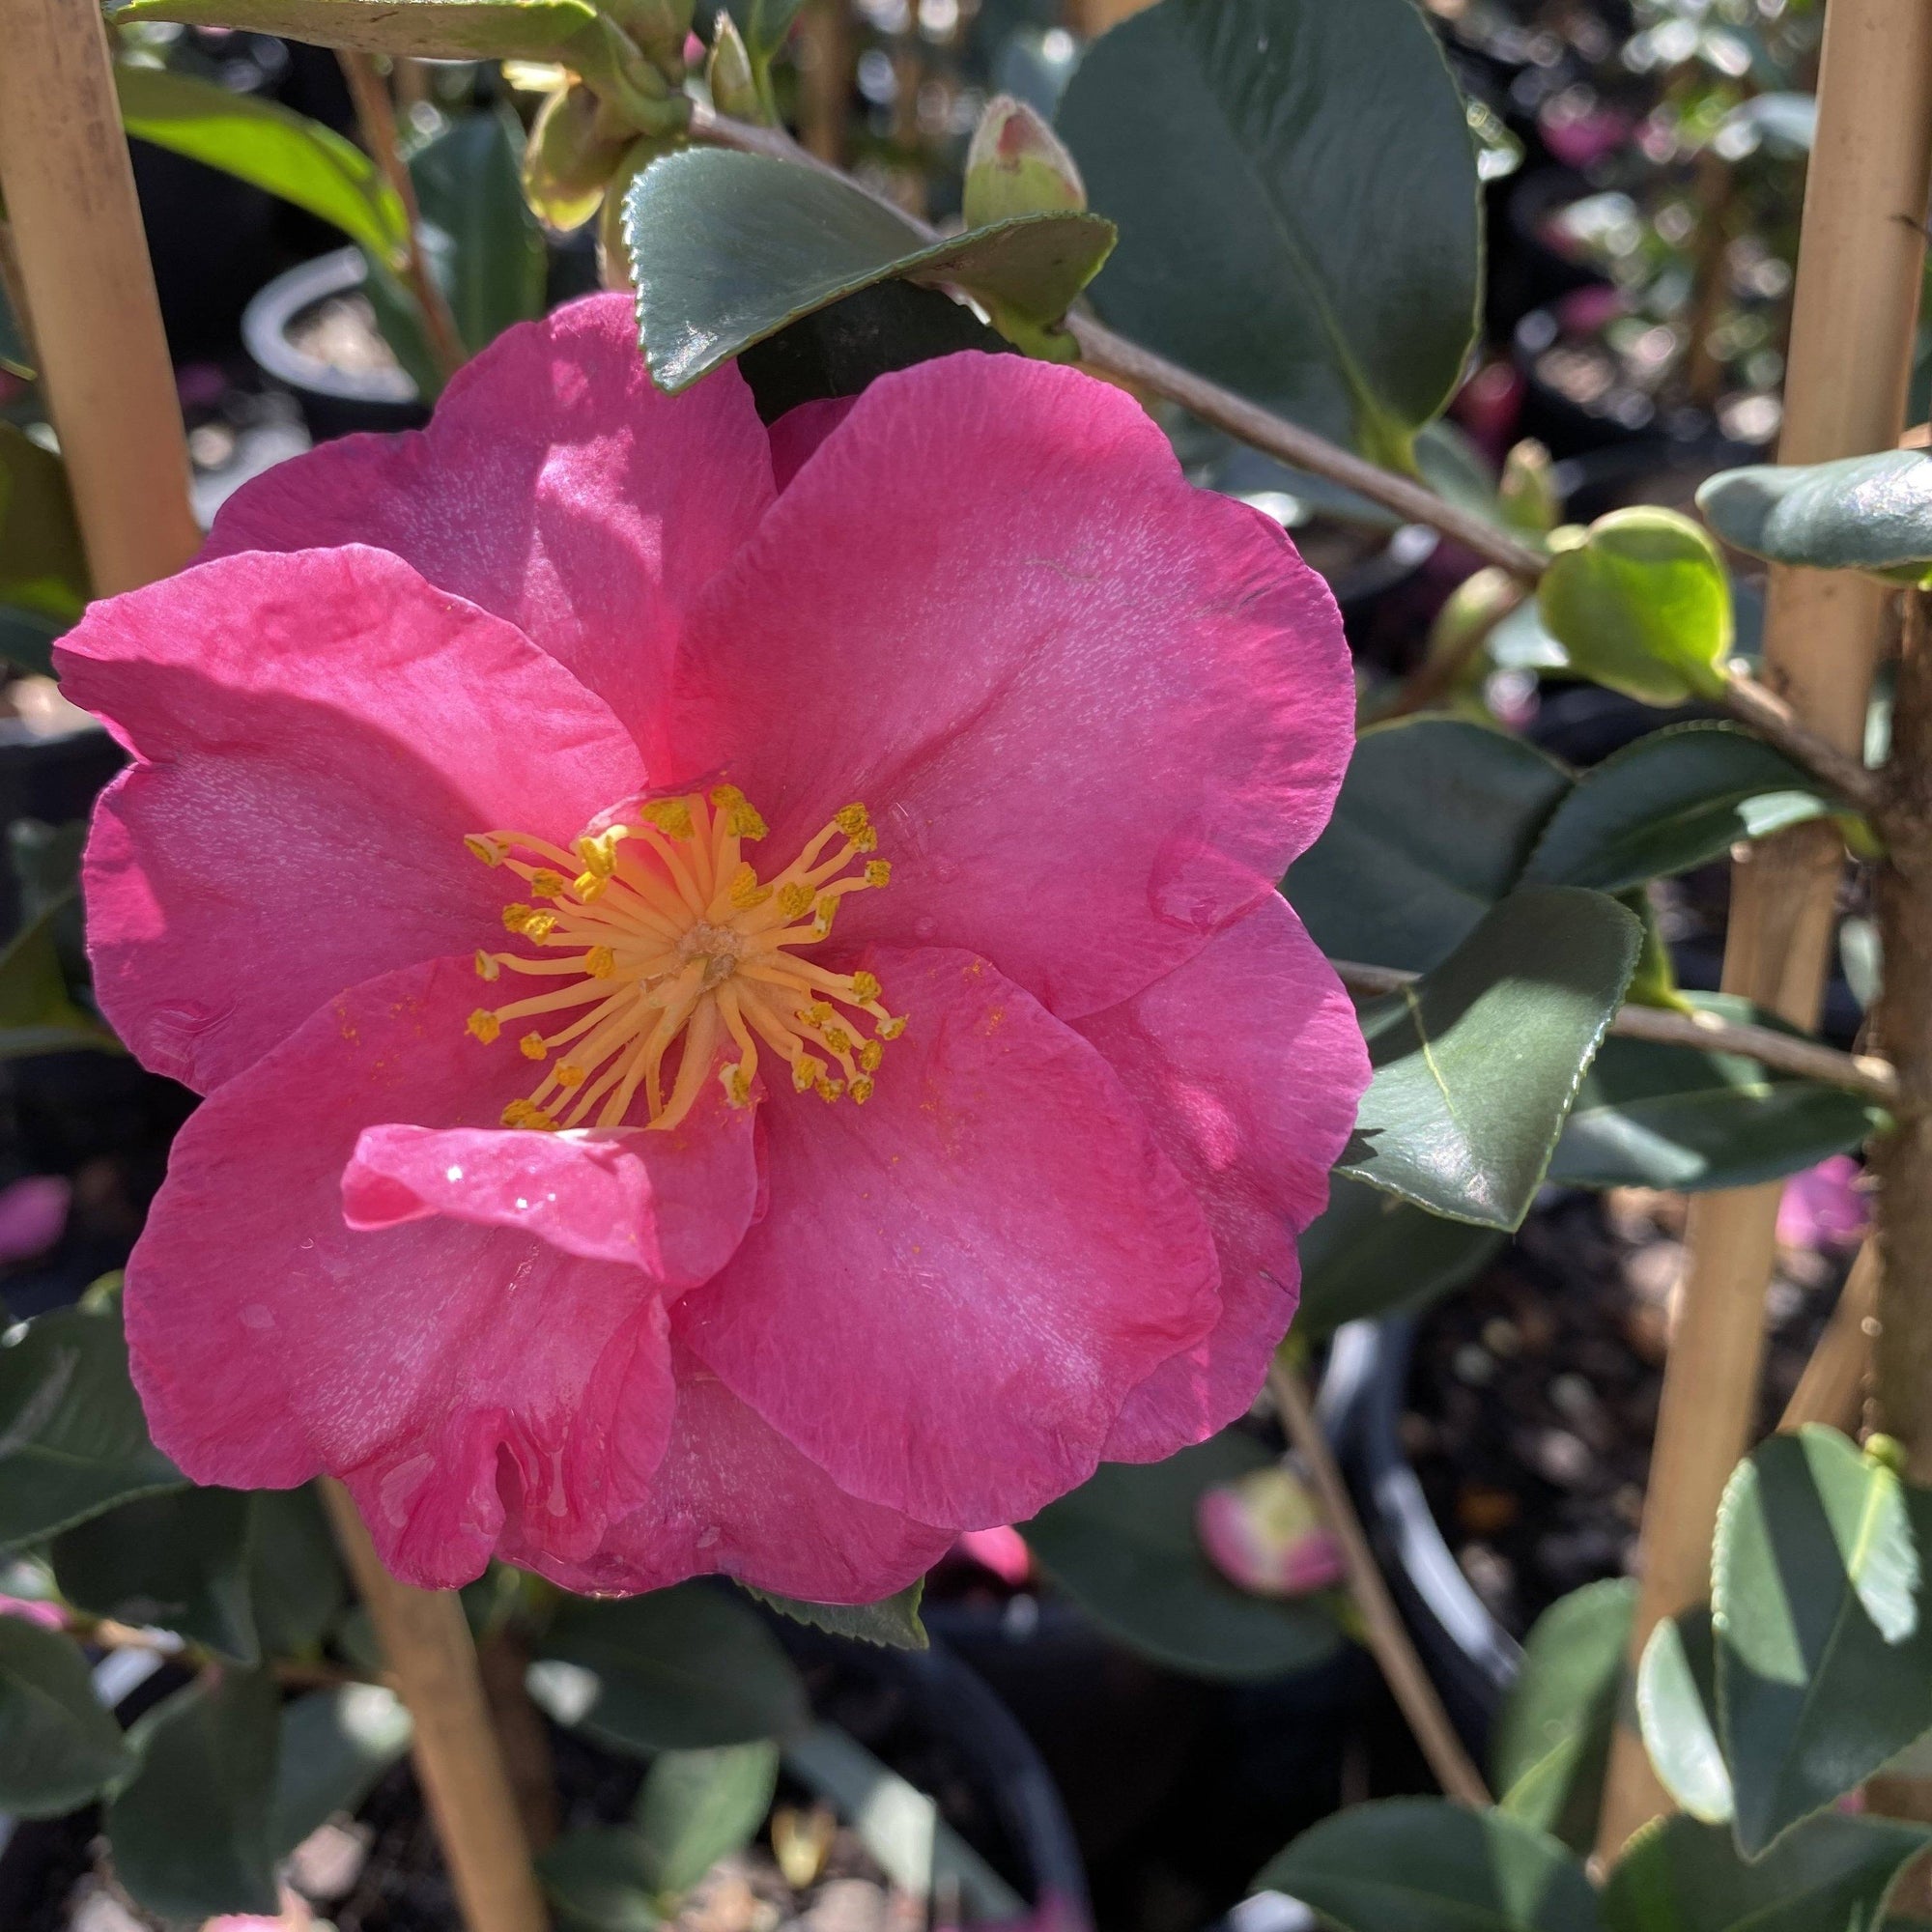 Camellia 'Hiryu' has dark green glossy leaves and produces an abundance of large, deep pink flowers throughout autumn and winter